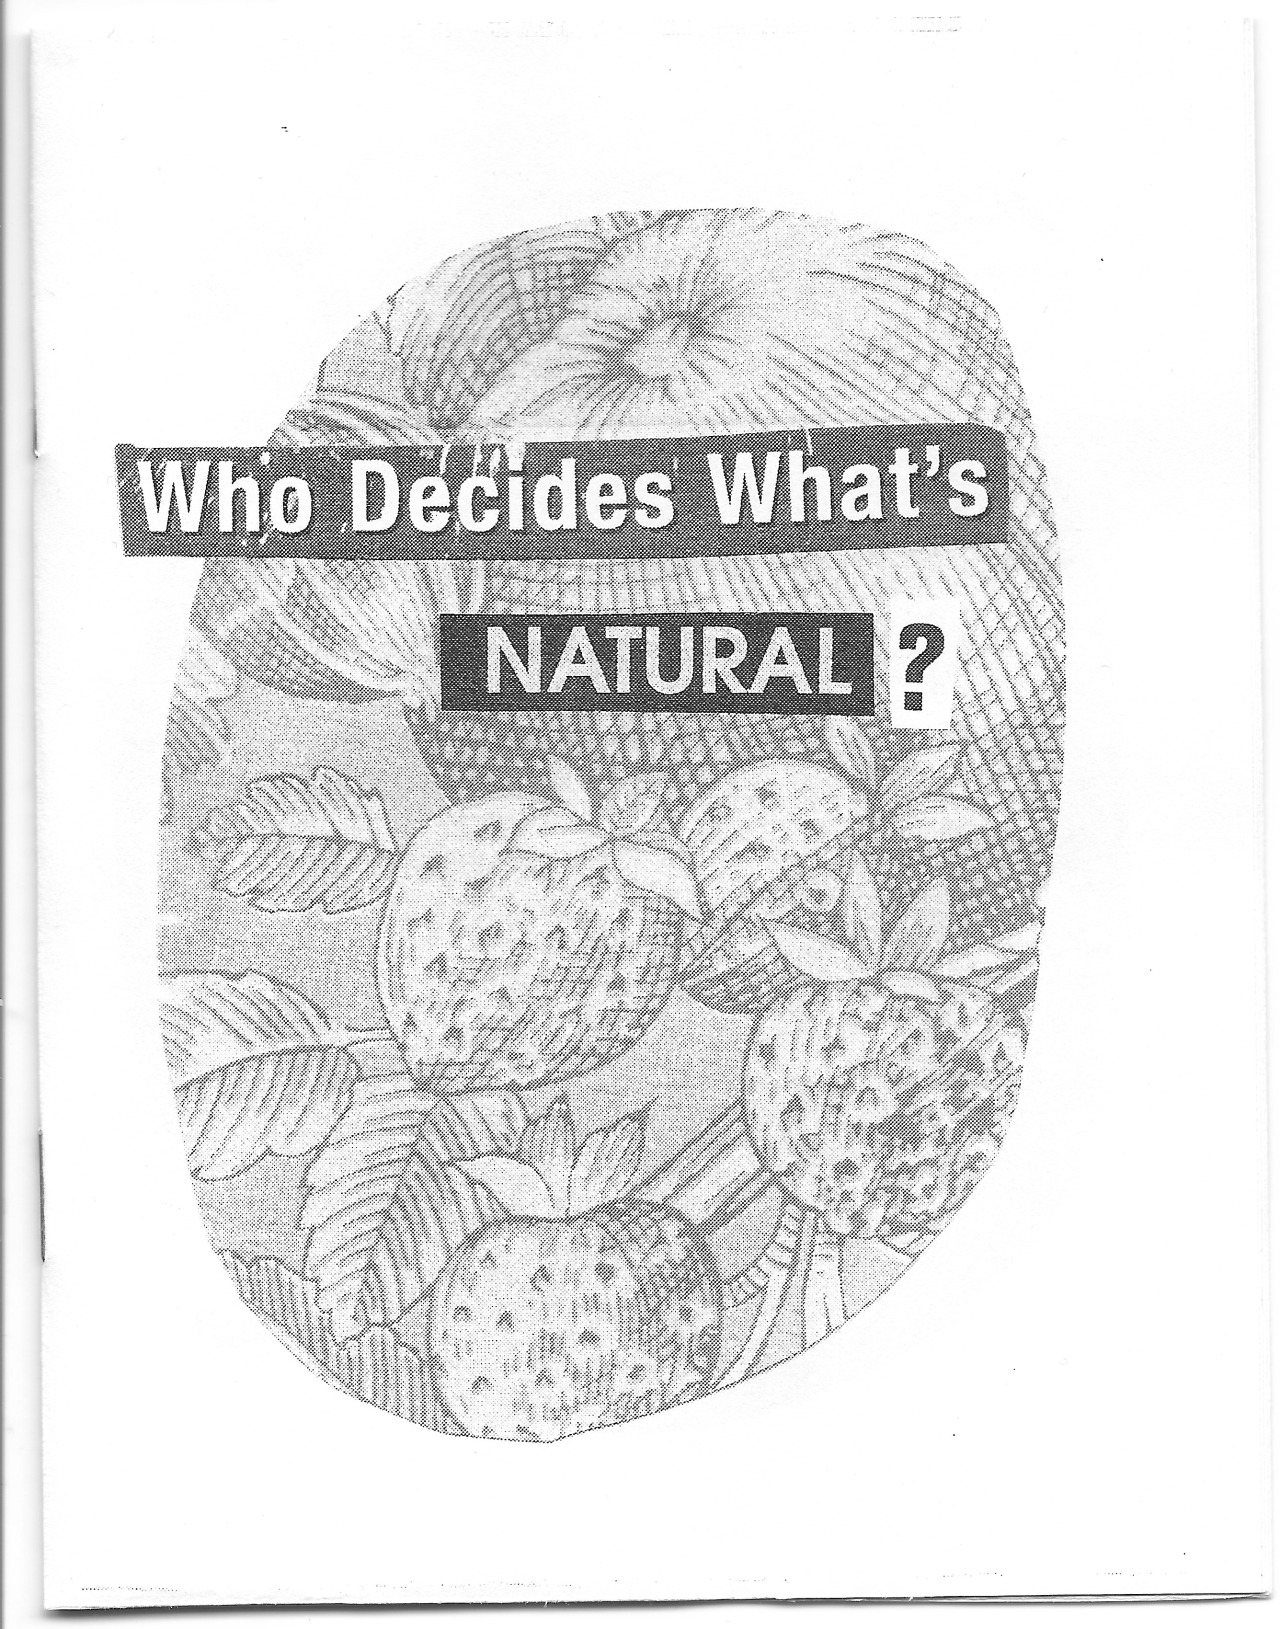 who decides what's natural?